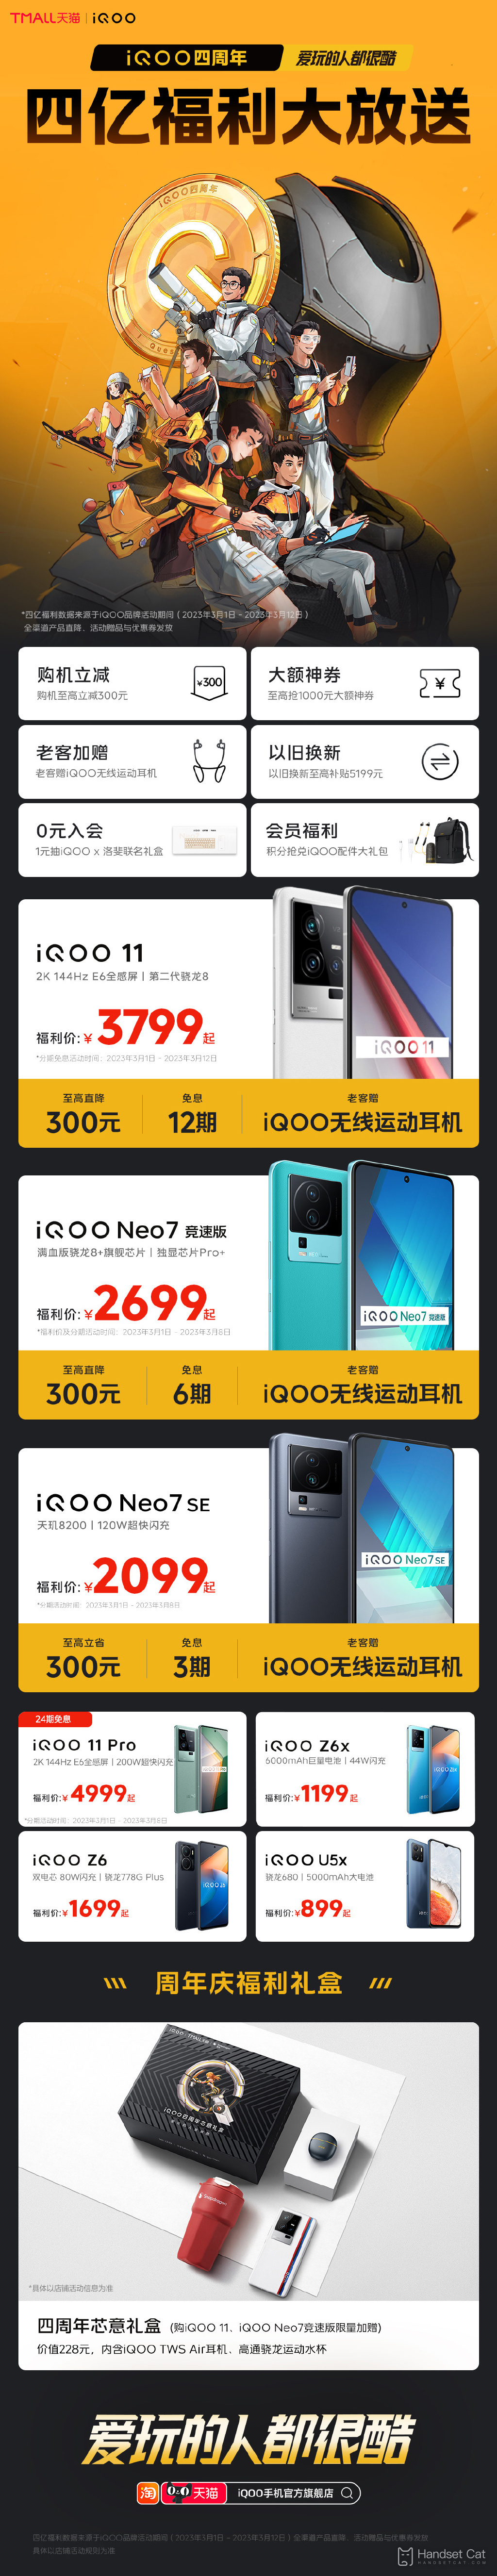 The iQOO 4th Anniversary Bonus, iQOO 11 and other benefits can be reduced by 300 yuan directly